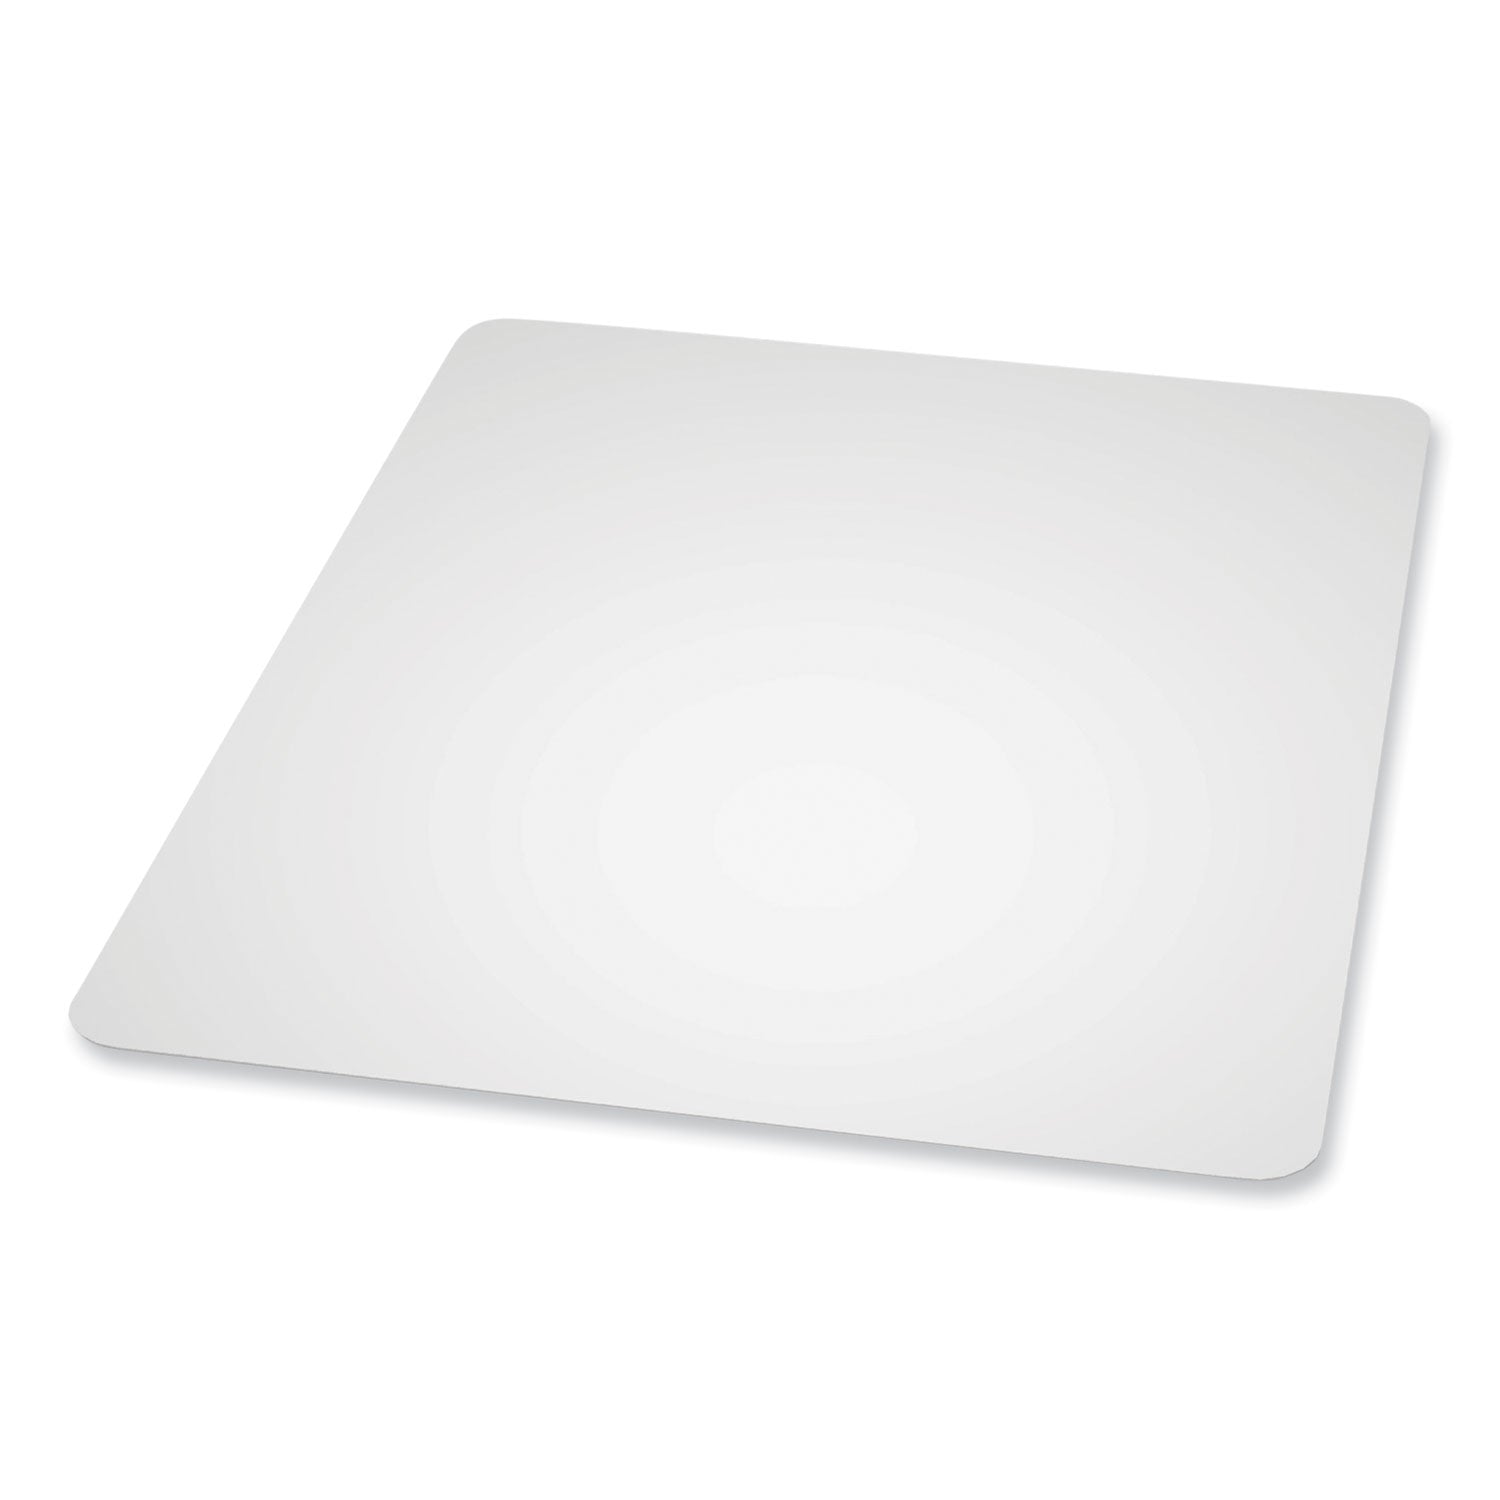 everlife-textured-chair-mat-for-hard-floors-square-60-x-60-clear-ships-in-4-6-business-days_esr132631 - 1